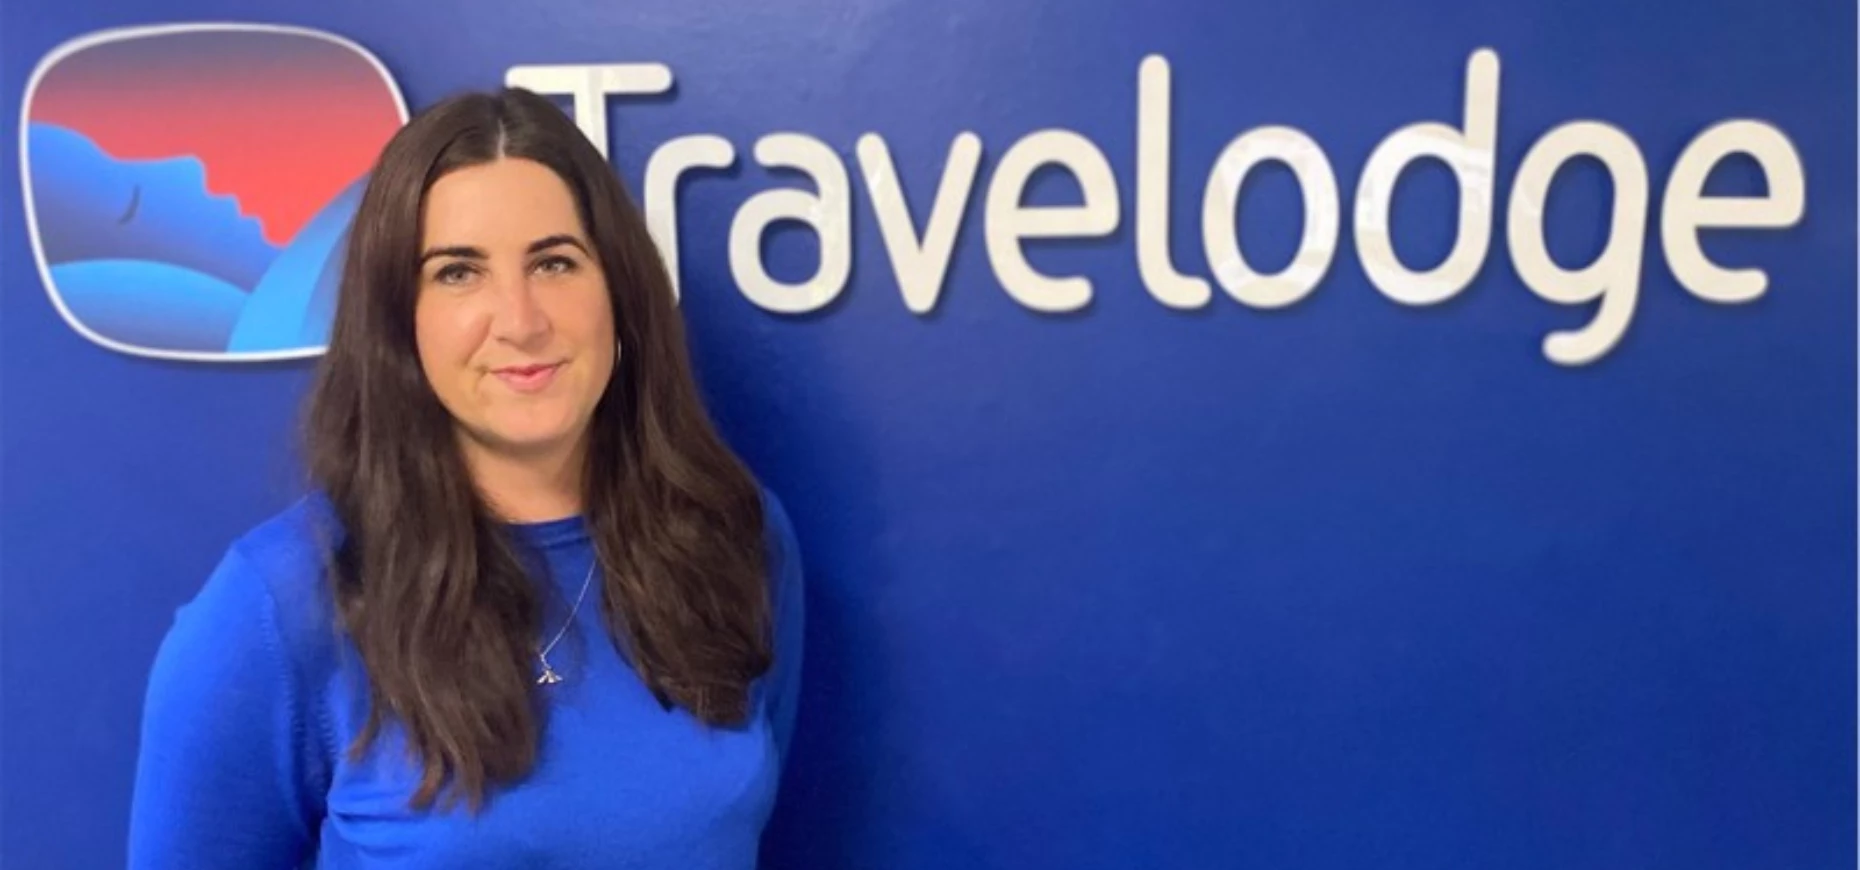 Kirsty Berry, Travelodge's newly appointed Head of Estates.